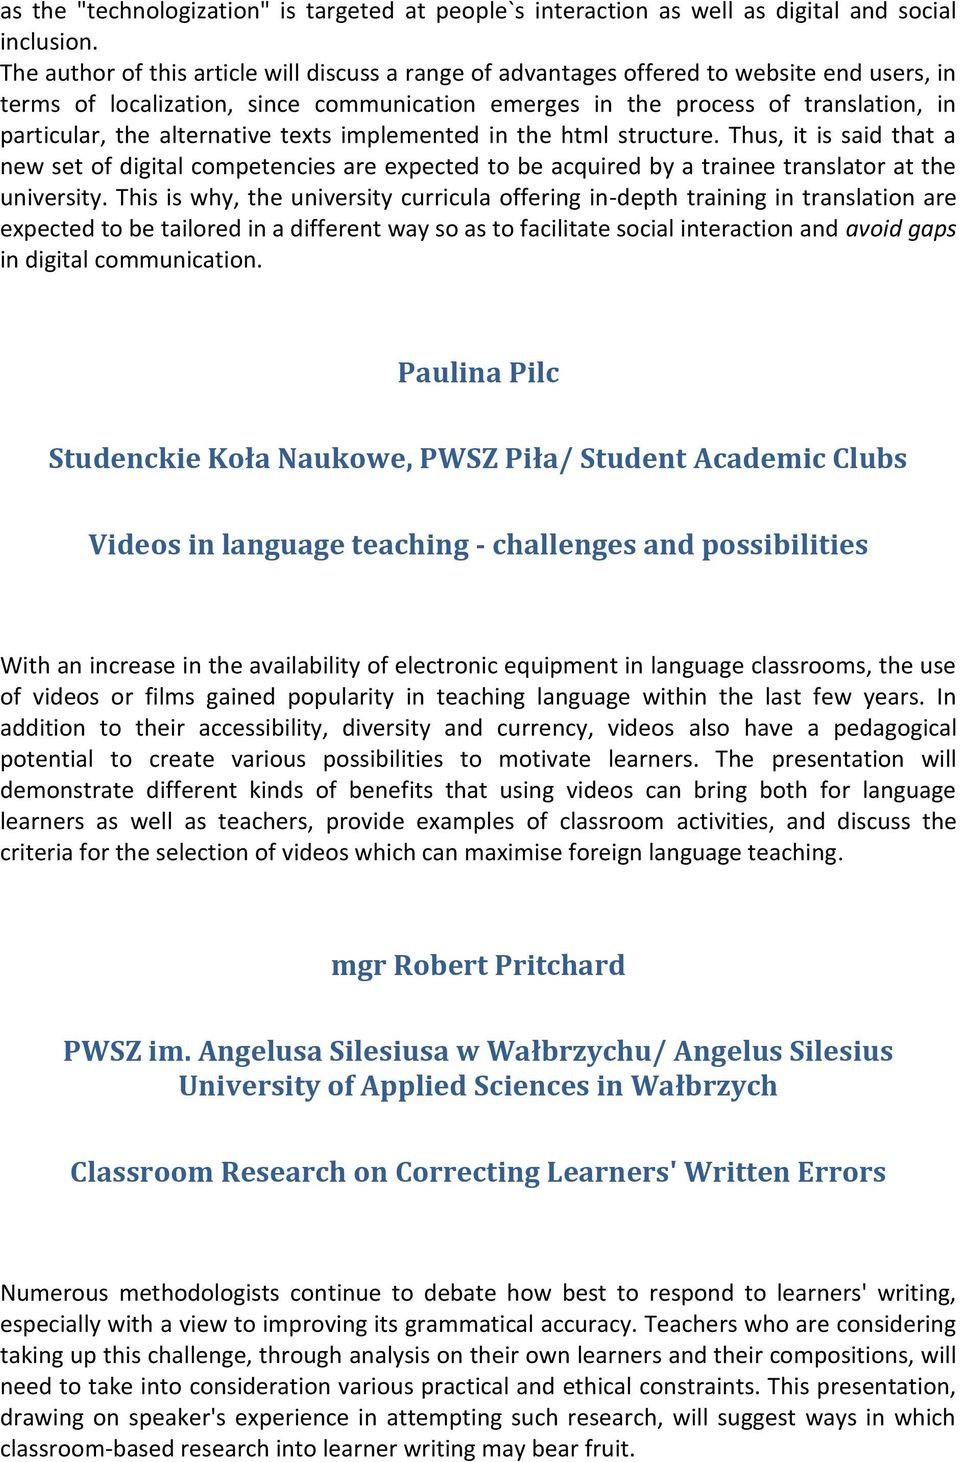 alternative texts implemented in the html structure. Thus, it is said that a new set of digital competencies are expected to be acquired by a trainee translator at the university.